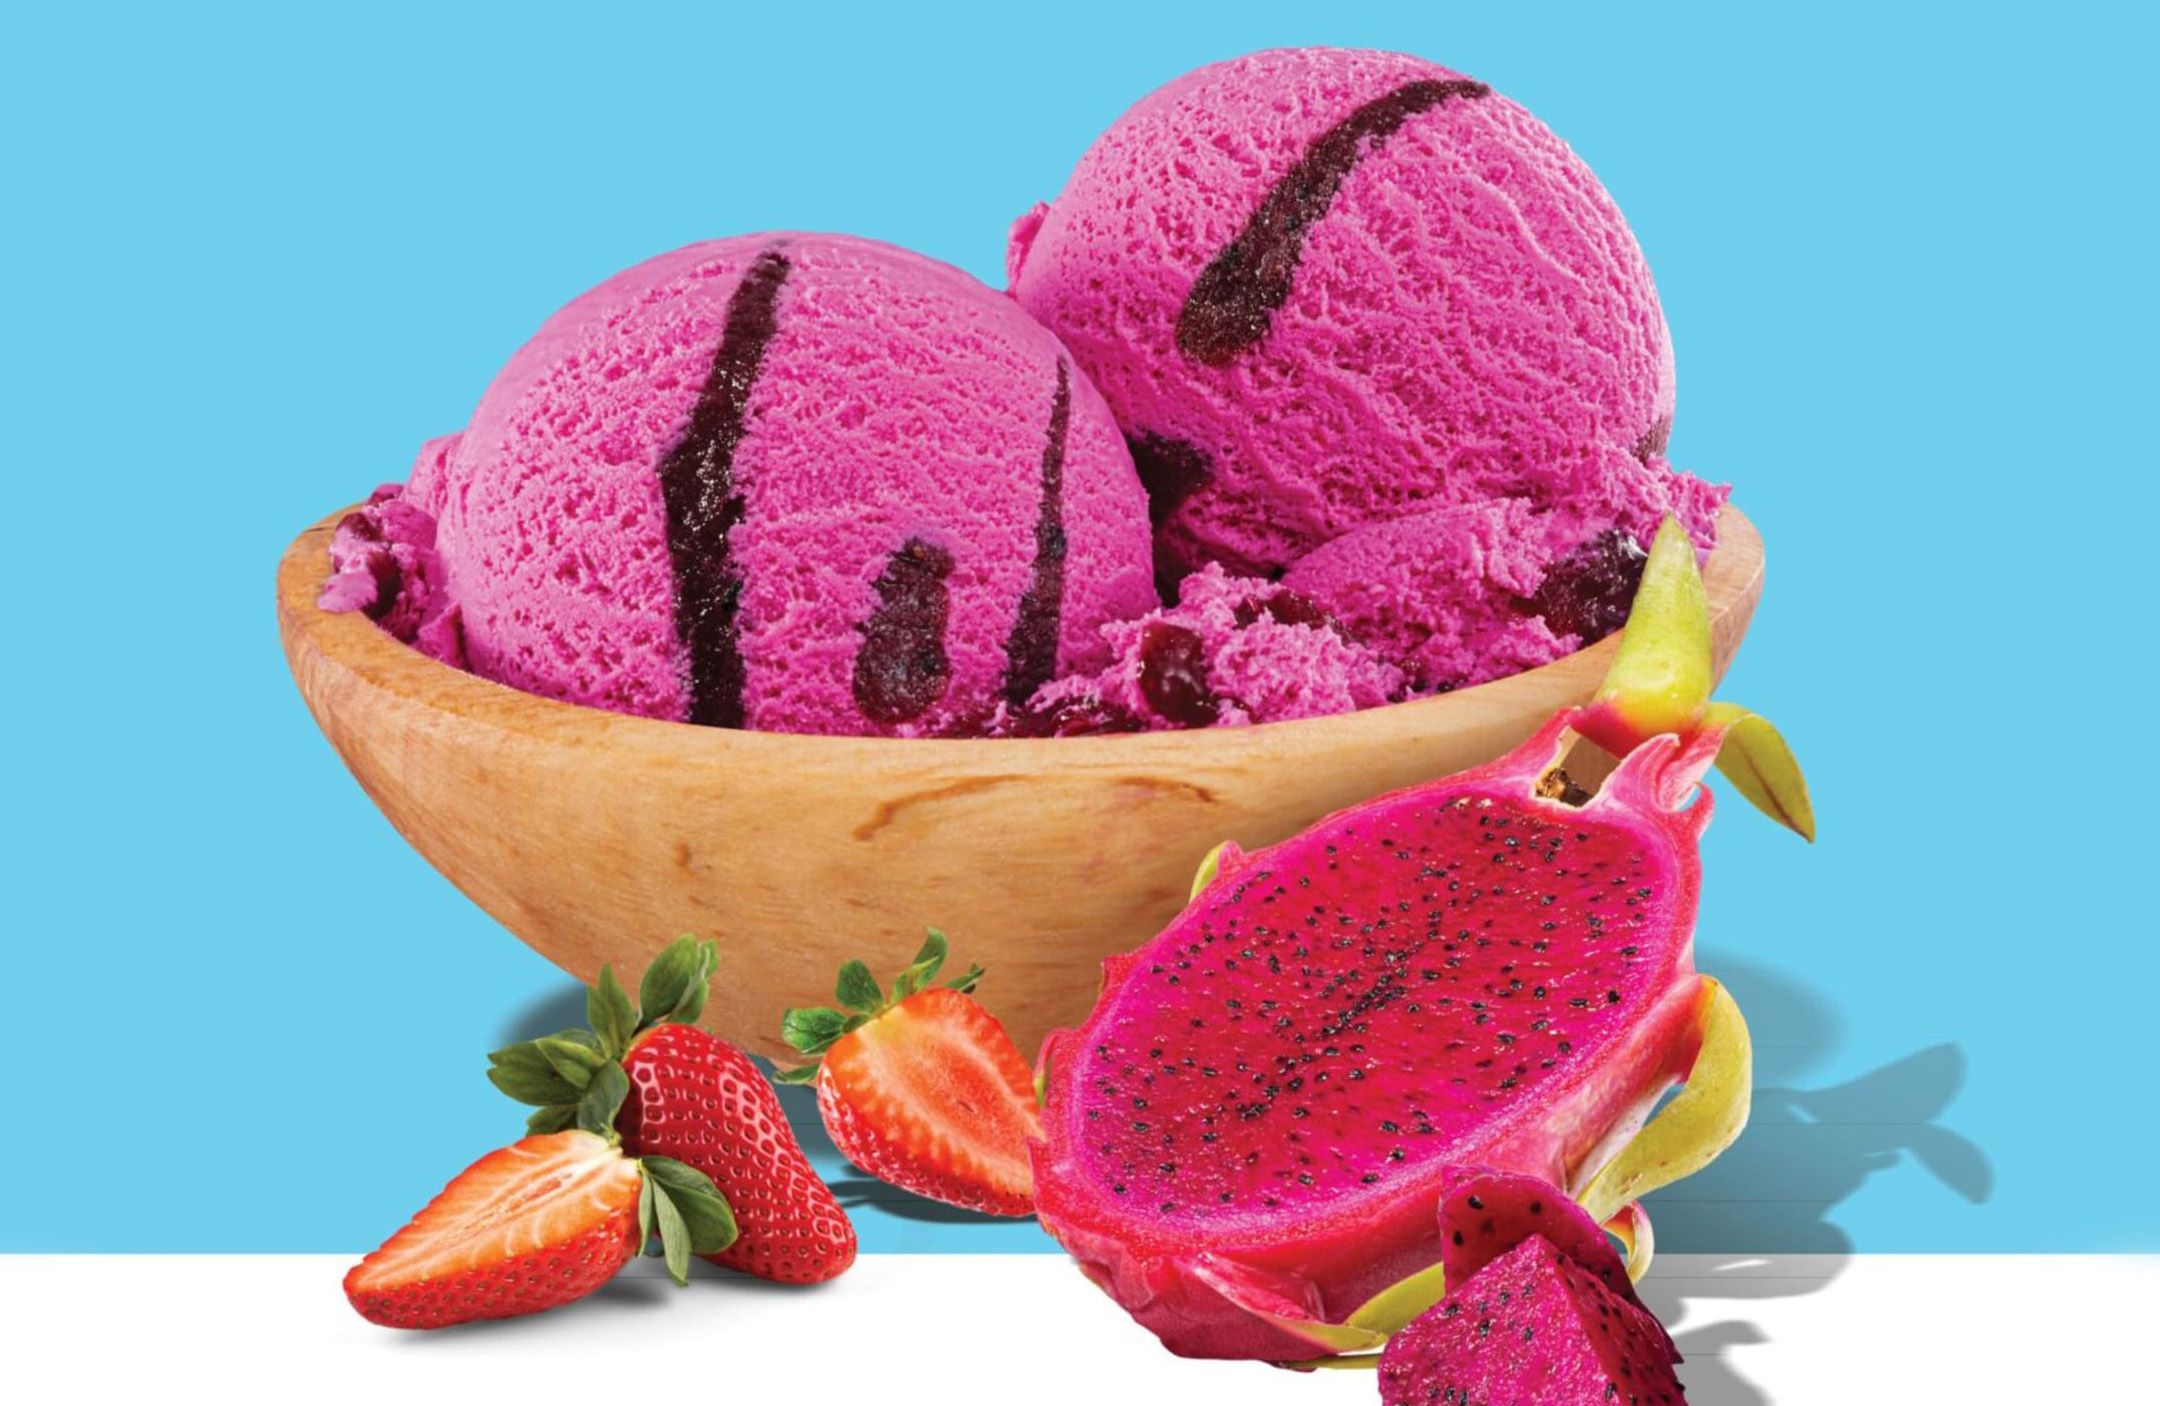 Baskin-Robbins Unveils their New Strawberry Dragonfruit Ice Cream as May’s Flavor of the Month